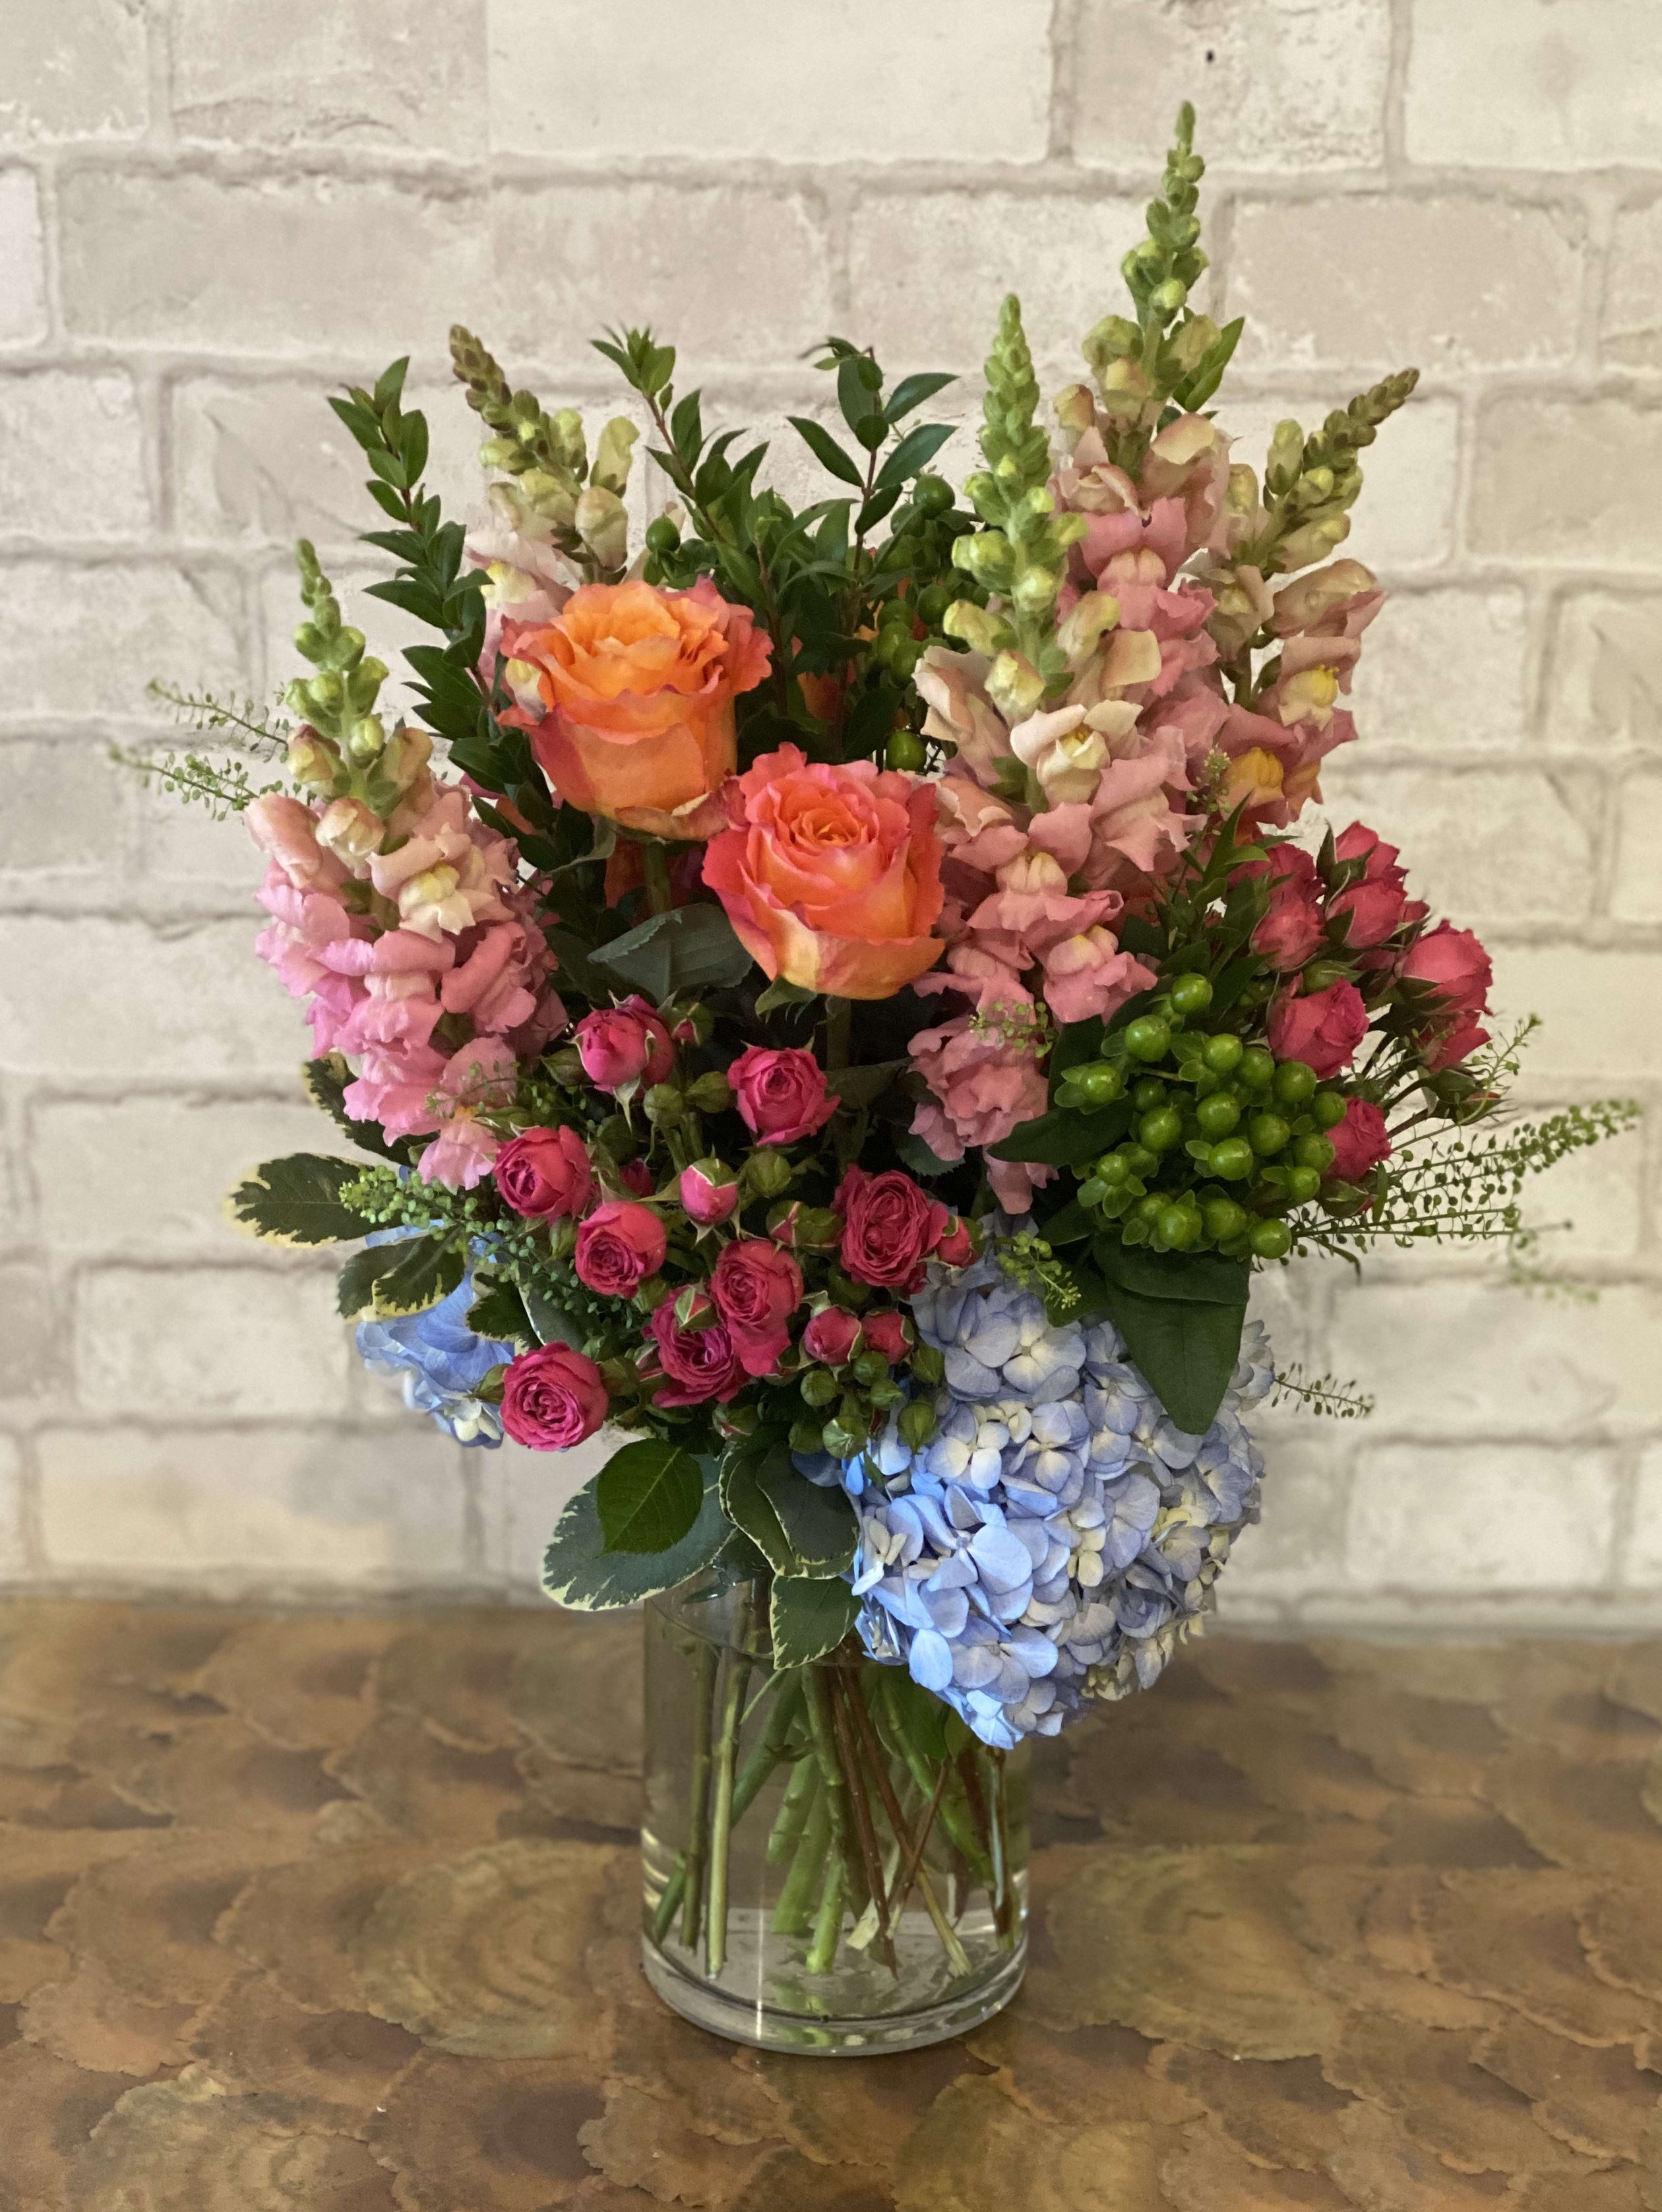 Spirited Snapdragon - An assortment of blue hydrangea, pink snapdragon, peach roses and hot pink spray roses. Arranged in a medium cylinder vase.